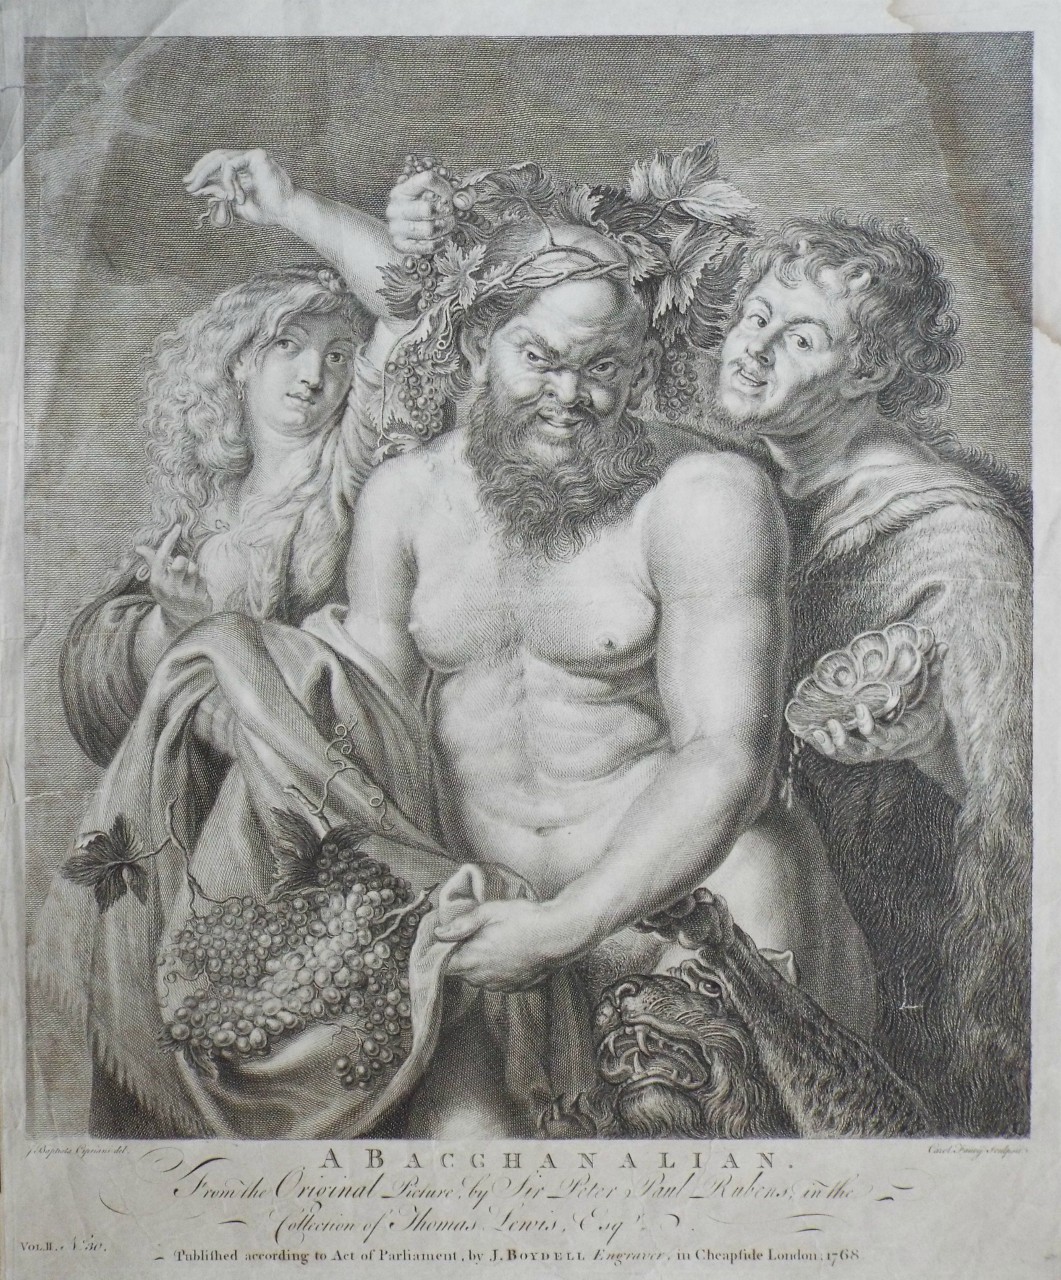 Print - A Bacchanalian. From the Original Picture, by Sir Peter Paul Rubens, in the Collection of Thomas Lewis Esqr. - Fauciy